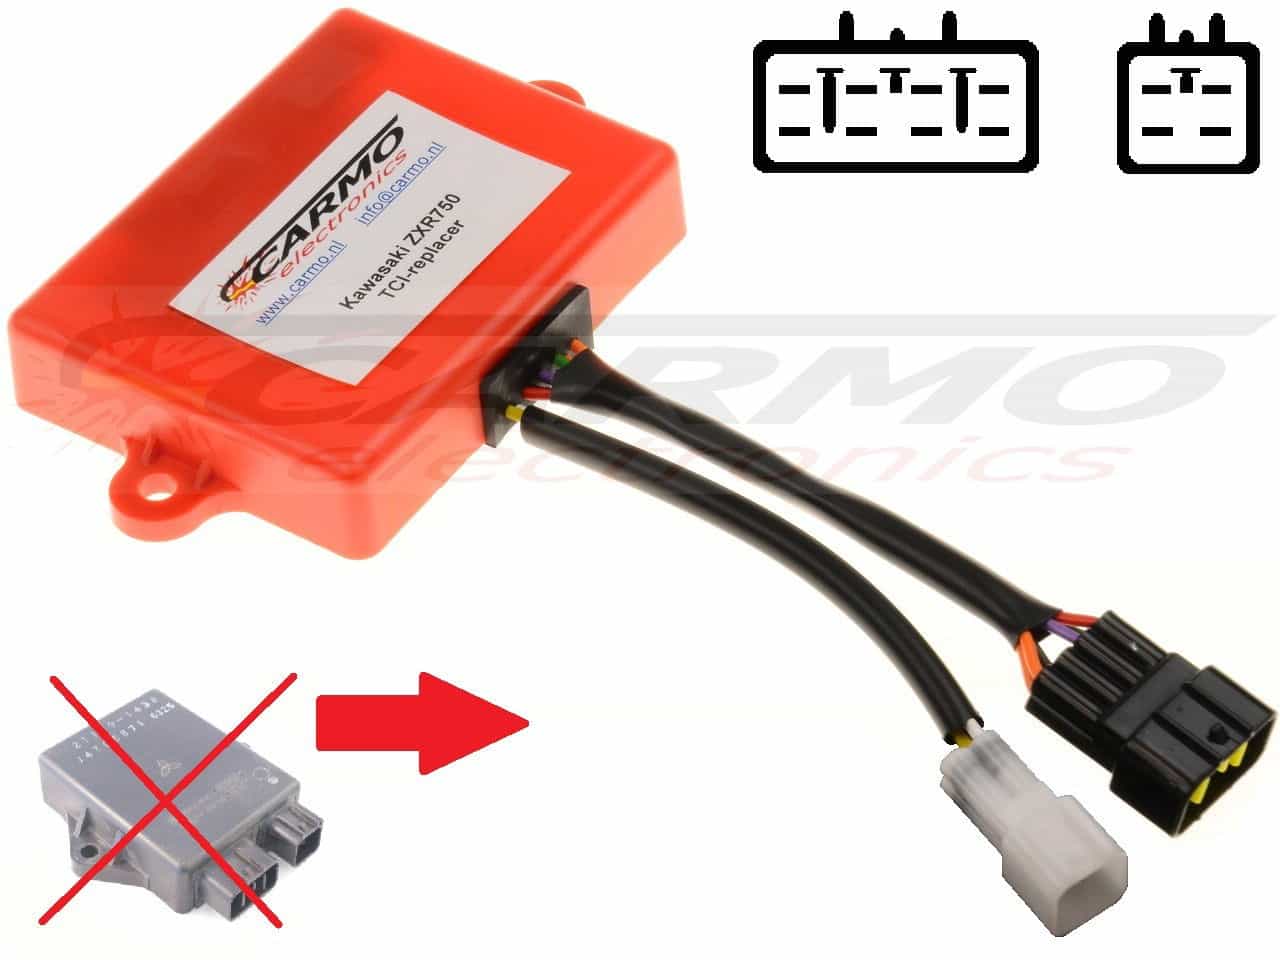 Kawasaki CDI Replacer 21119-1363 [ZXR750 21119-1363 replacer] The one-stop-shop for all kinds of electronic repairs, by